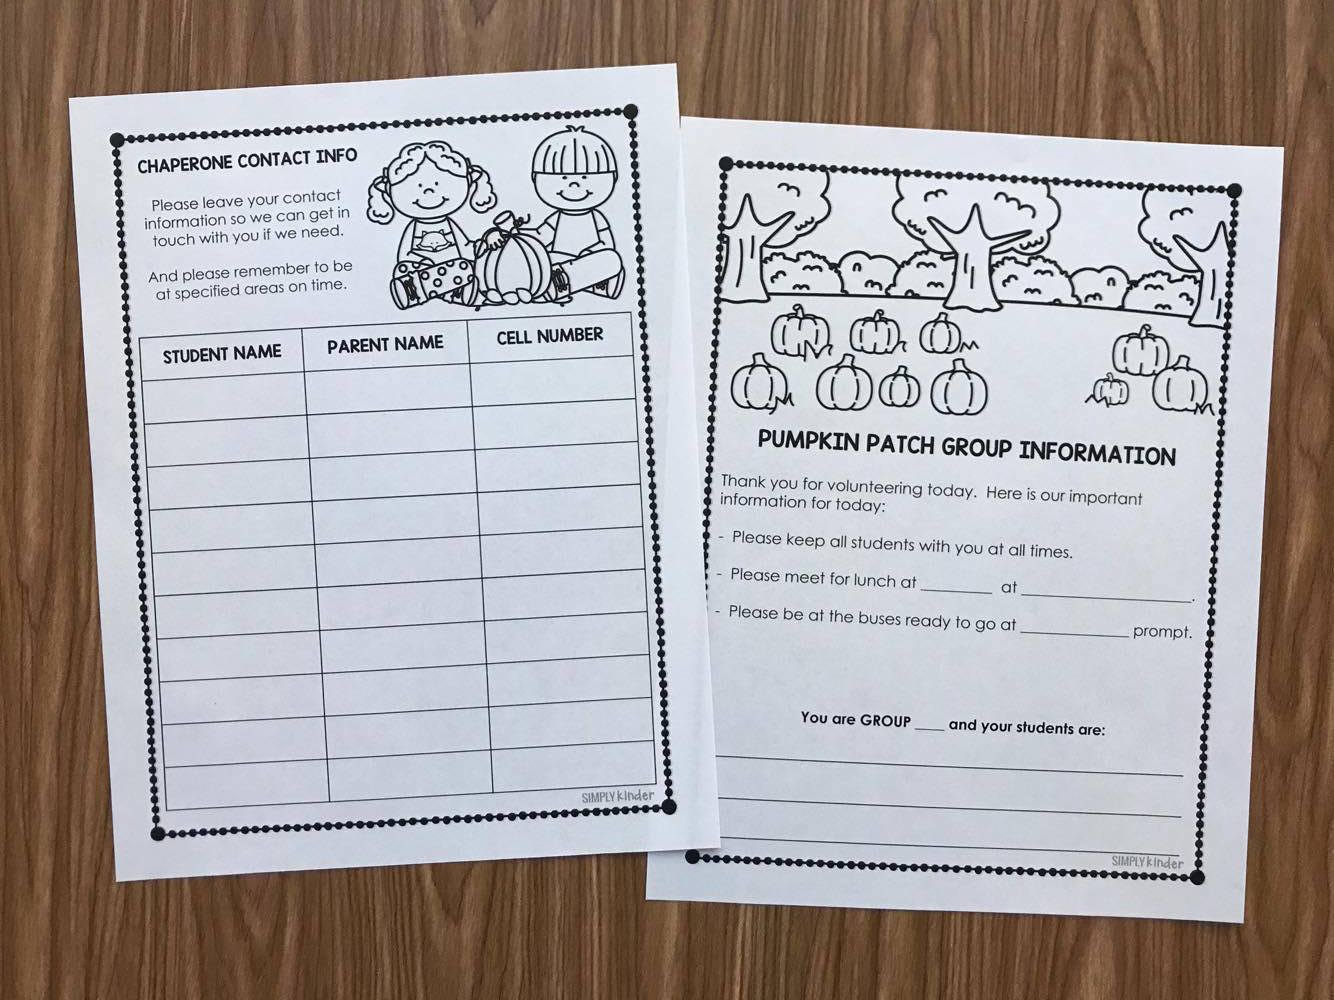 Pumpkin Patch Field Trip Printables from Simply Kinder! Everything from permission slips to reflection activities. Your field trip will be organized and fun! 